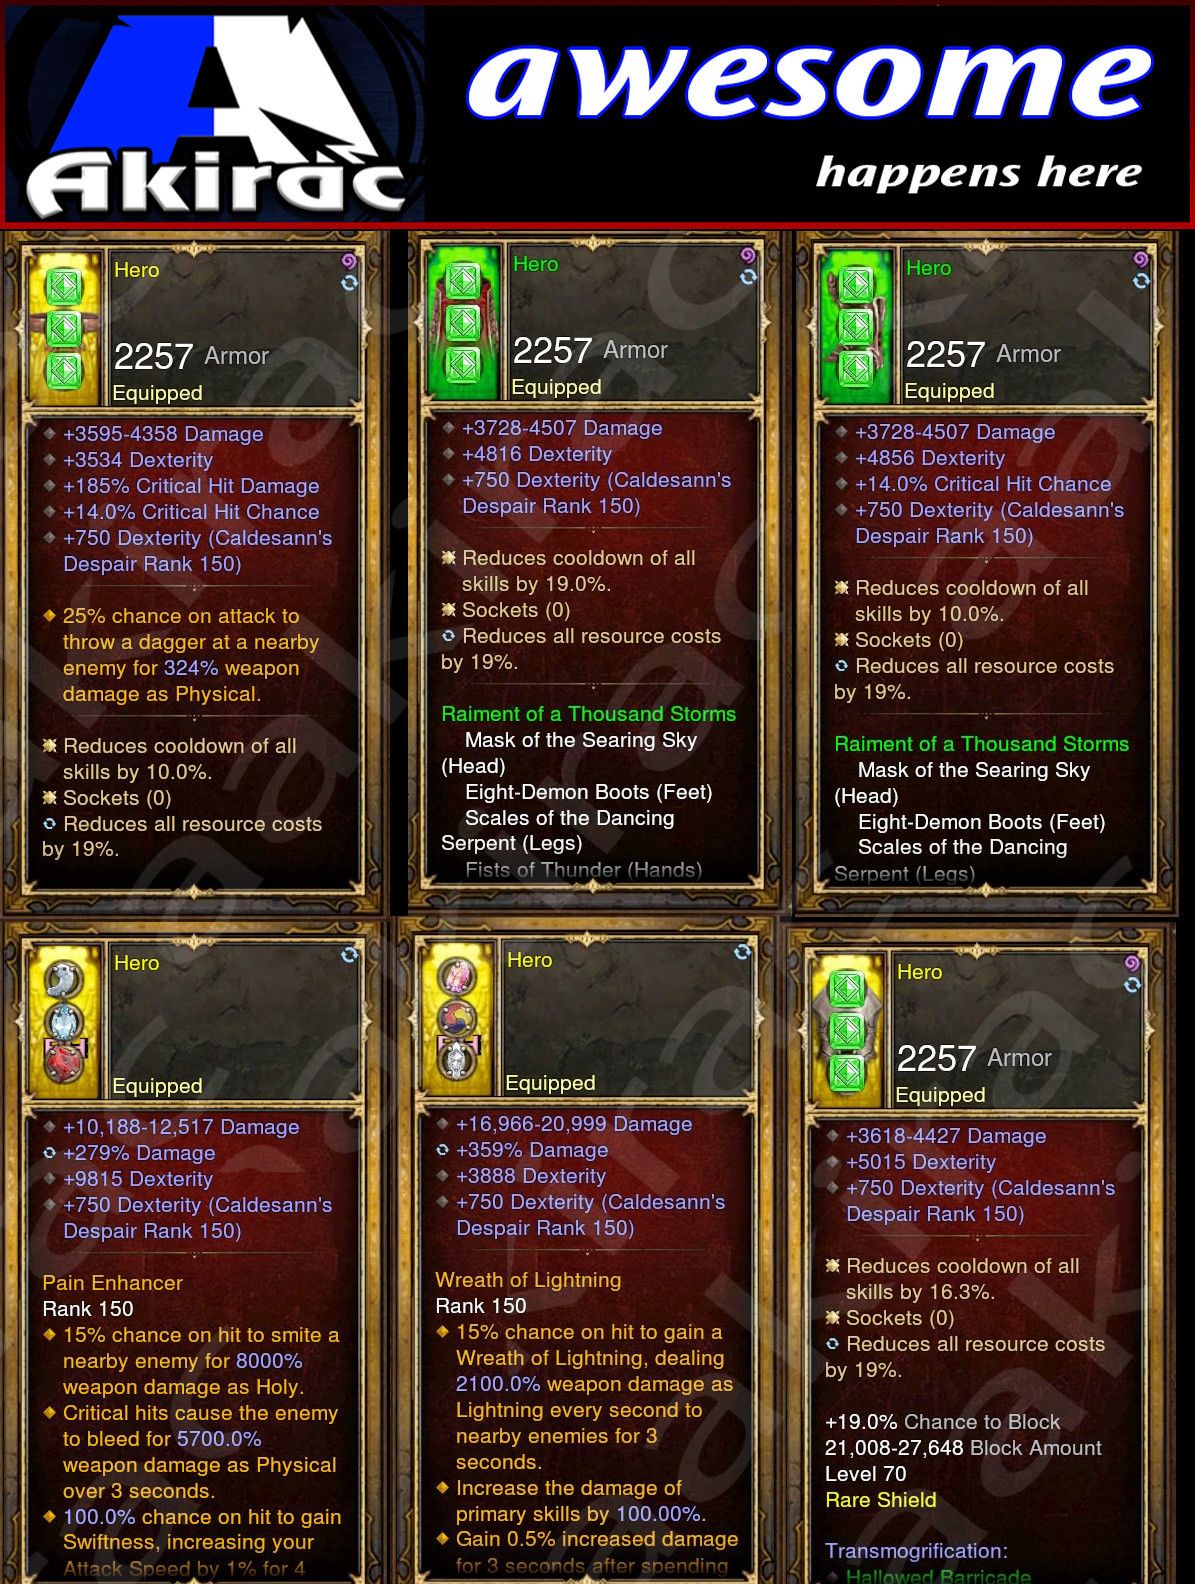 Diablo 3 Immortal v1 Thousand Storms Monk Modded Set for Rift 150 Hero Diablo 3 Mods ROS Seasonal and Non Seasonal Save Mod - Modded Items and Gear - Hacks - Cheats - Trainers for Playstation 4 - Playstation 5 - Nintendo Switch - Xbox One